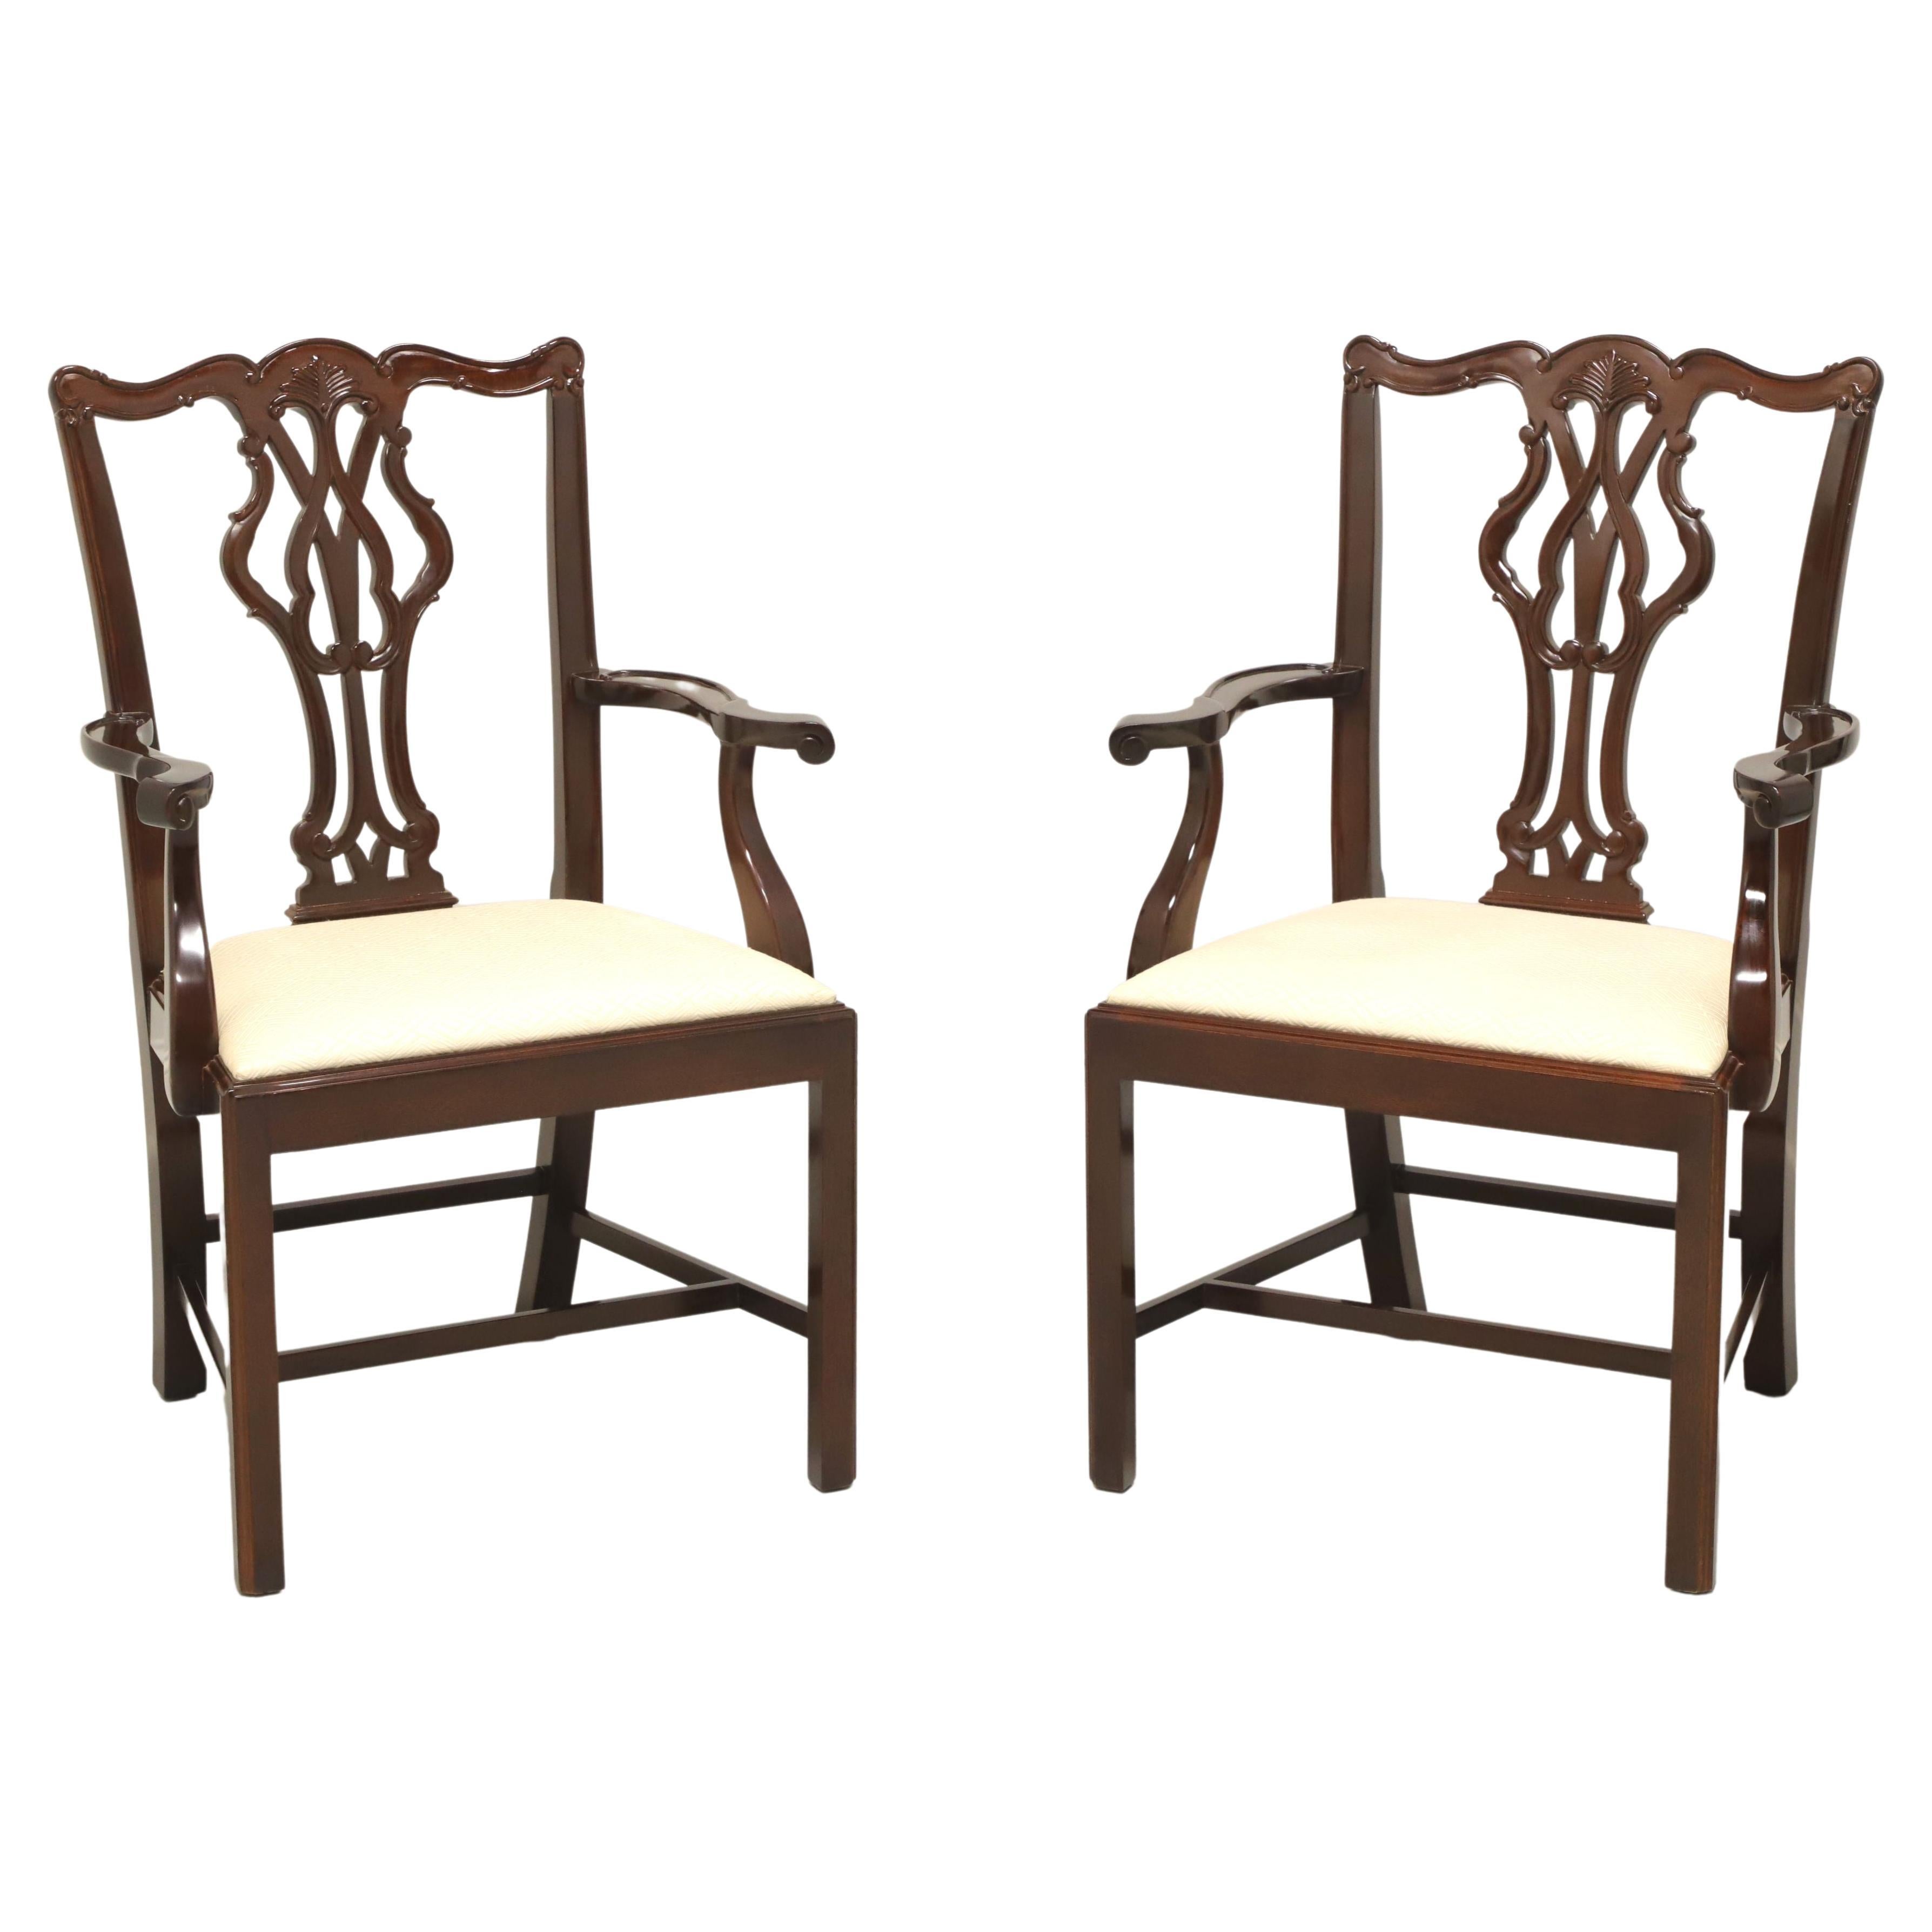 WELLINGTON HALL Mahogany Chippendale Straight Leg Dining Armchairs - Pair A